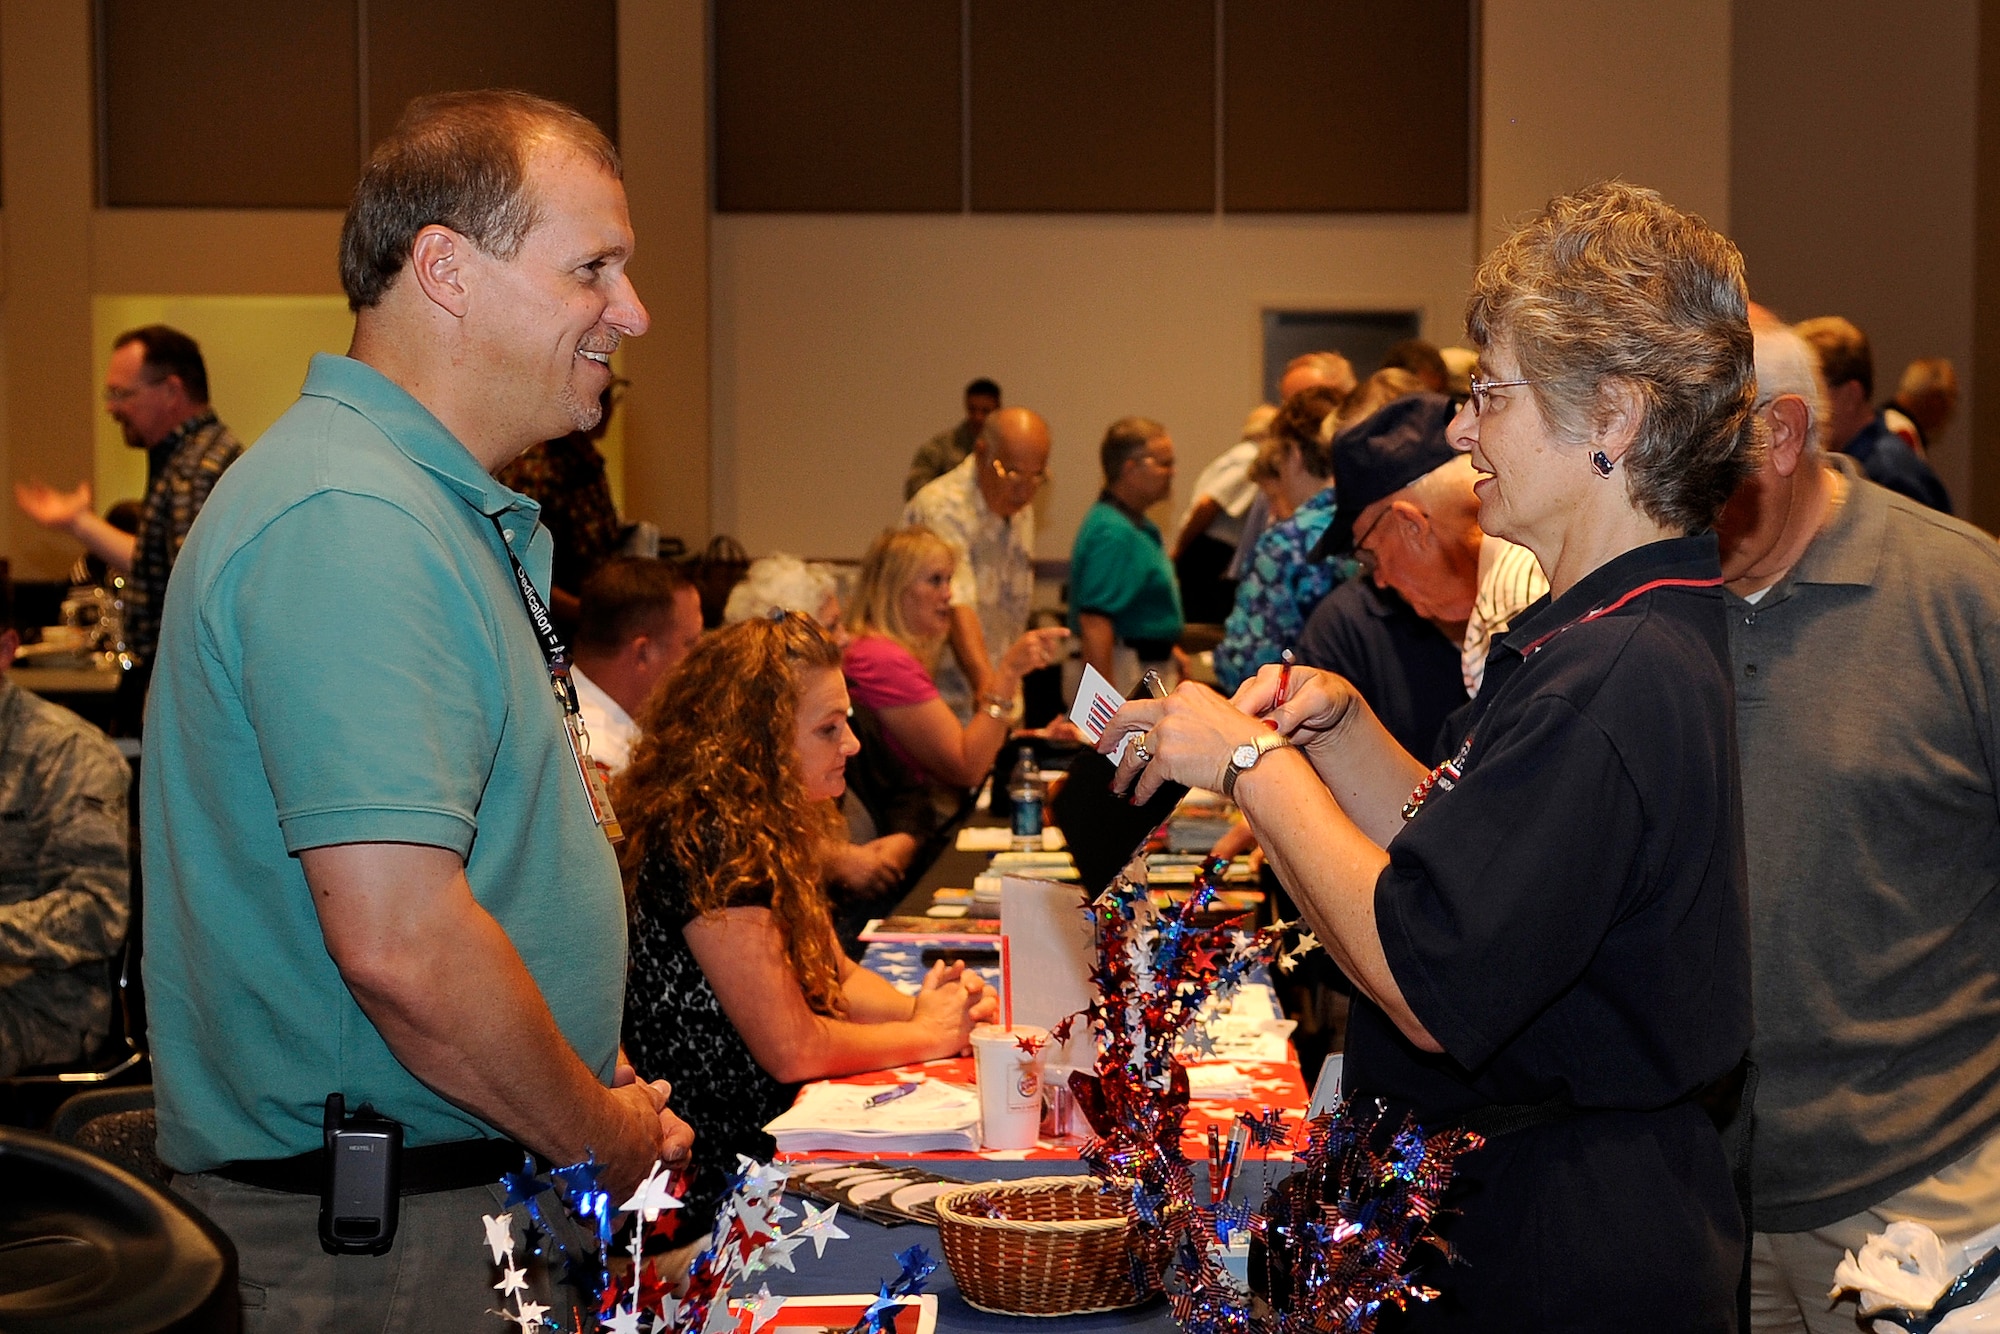 BUCKLEY AIR FORCE BASE, Colo. - More than 30 organizations gathered in support of the retirees at the 11th Annual Retiree Appreciation Day July 18. (U.S. Air Force photo by Senior Airman Steve Czyz)